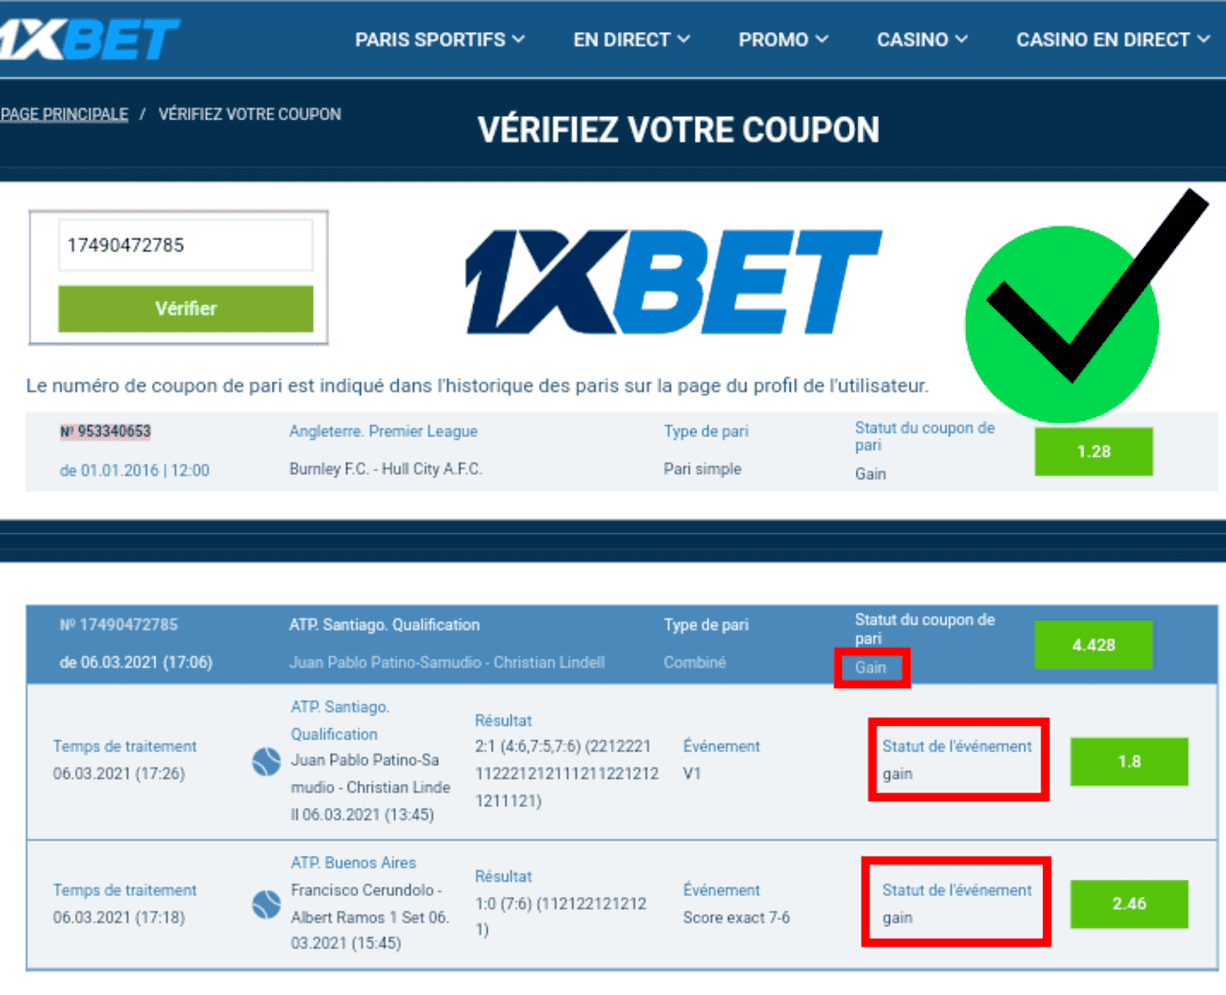 1xBet coupon: how to check and make one?